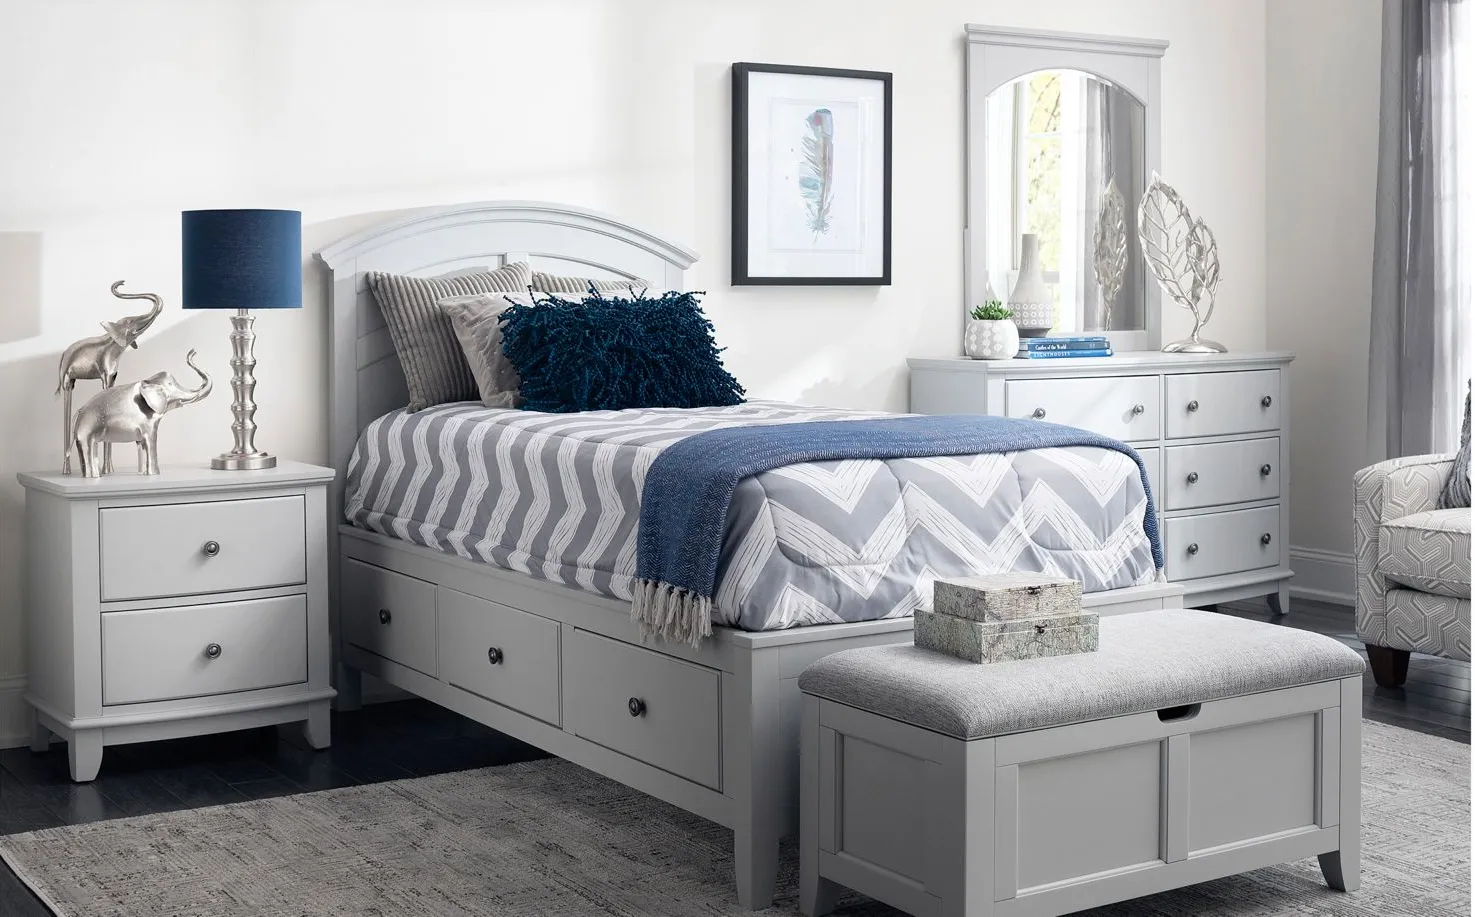 Kylie Youth 4-pc. Platform Bedroom Set w/ 1-Side Storage Bed in Gray by Bellanest